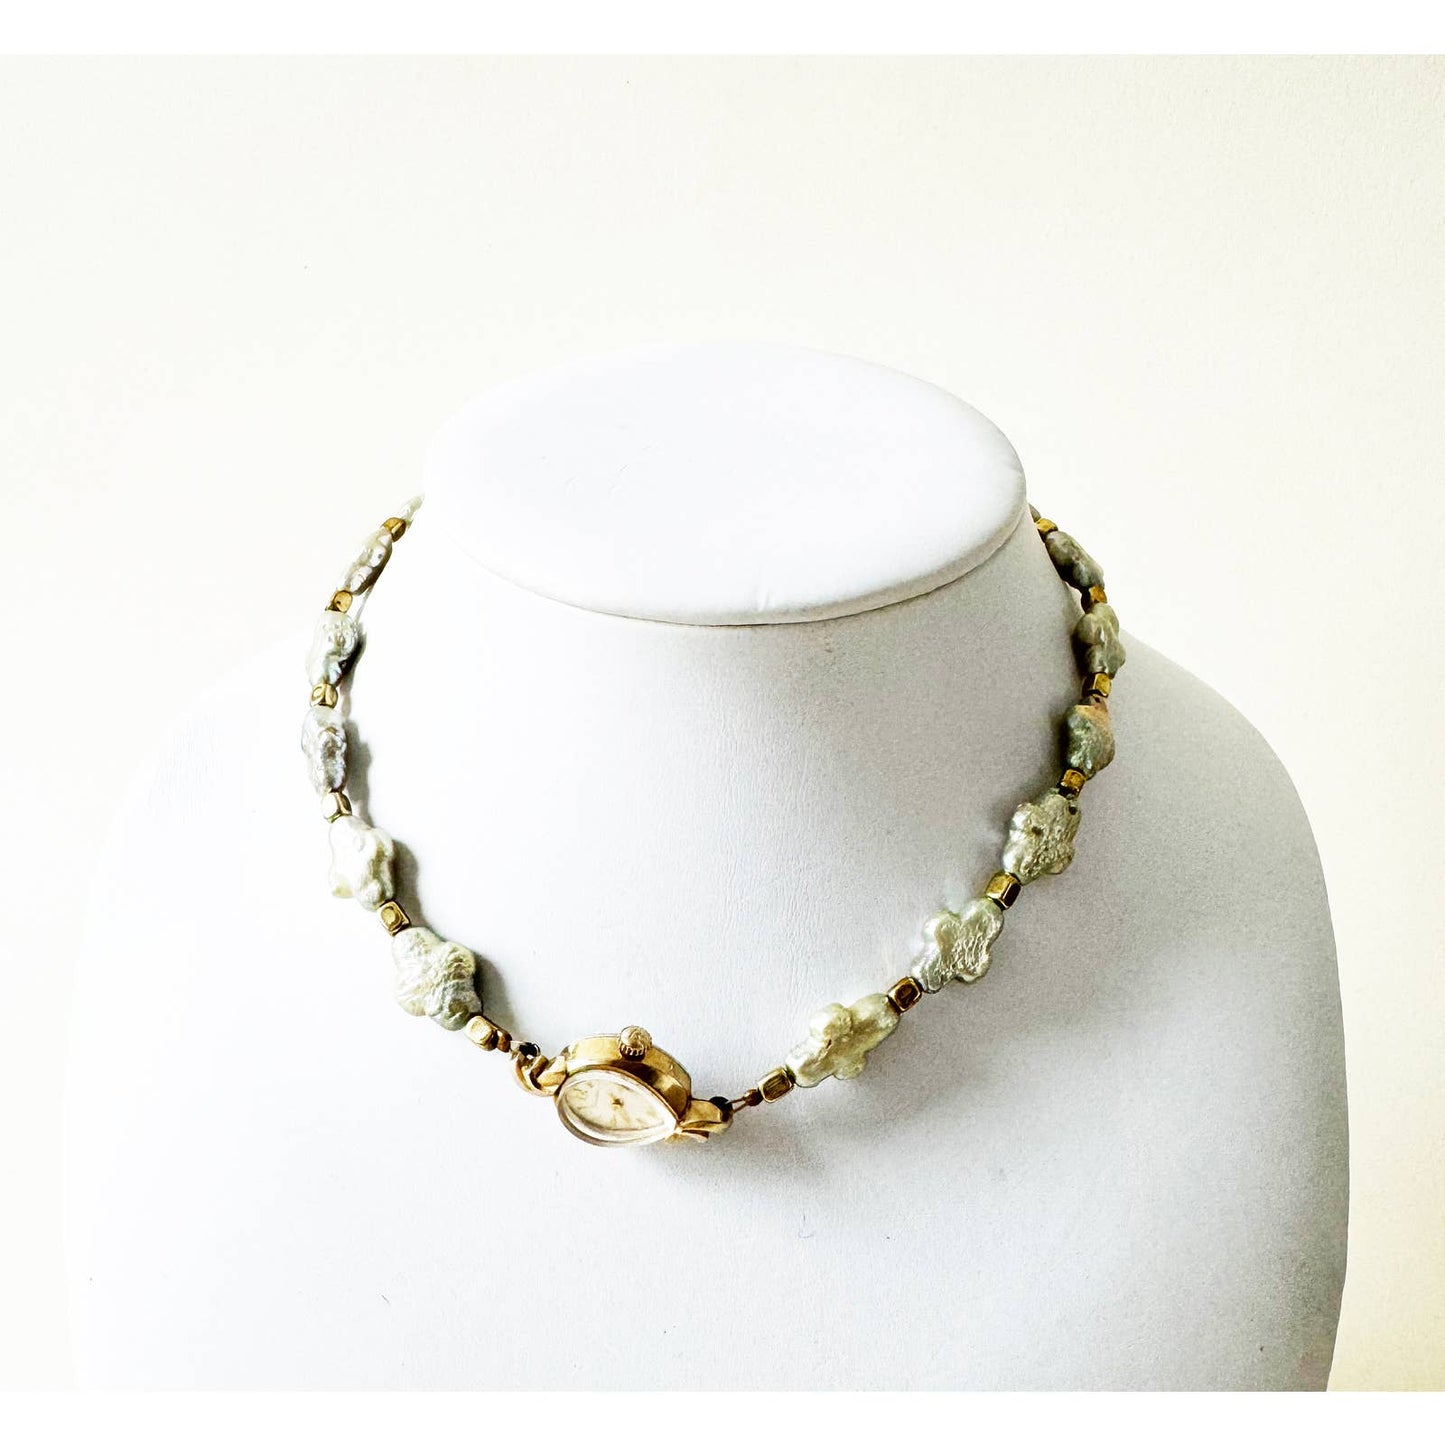 Watch Necklace | Vintage One of a Kind Watch Choker with Green Pearls Details | 10k Gold